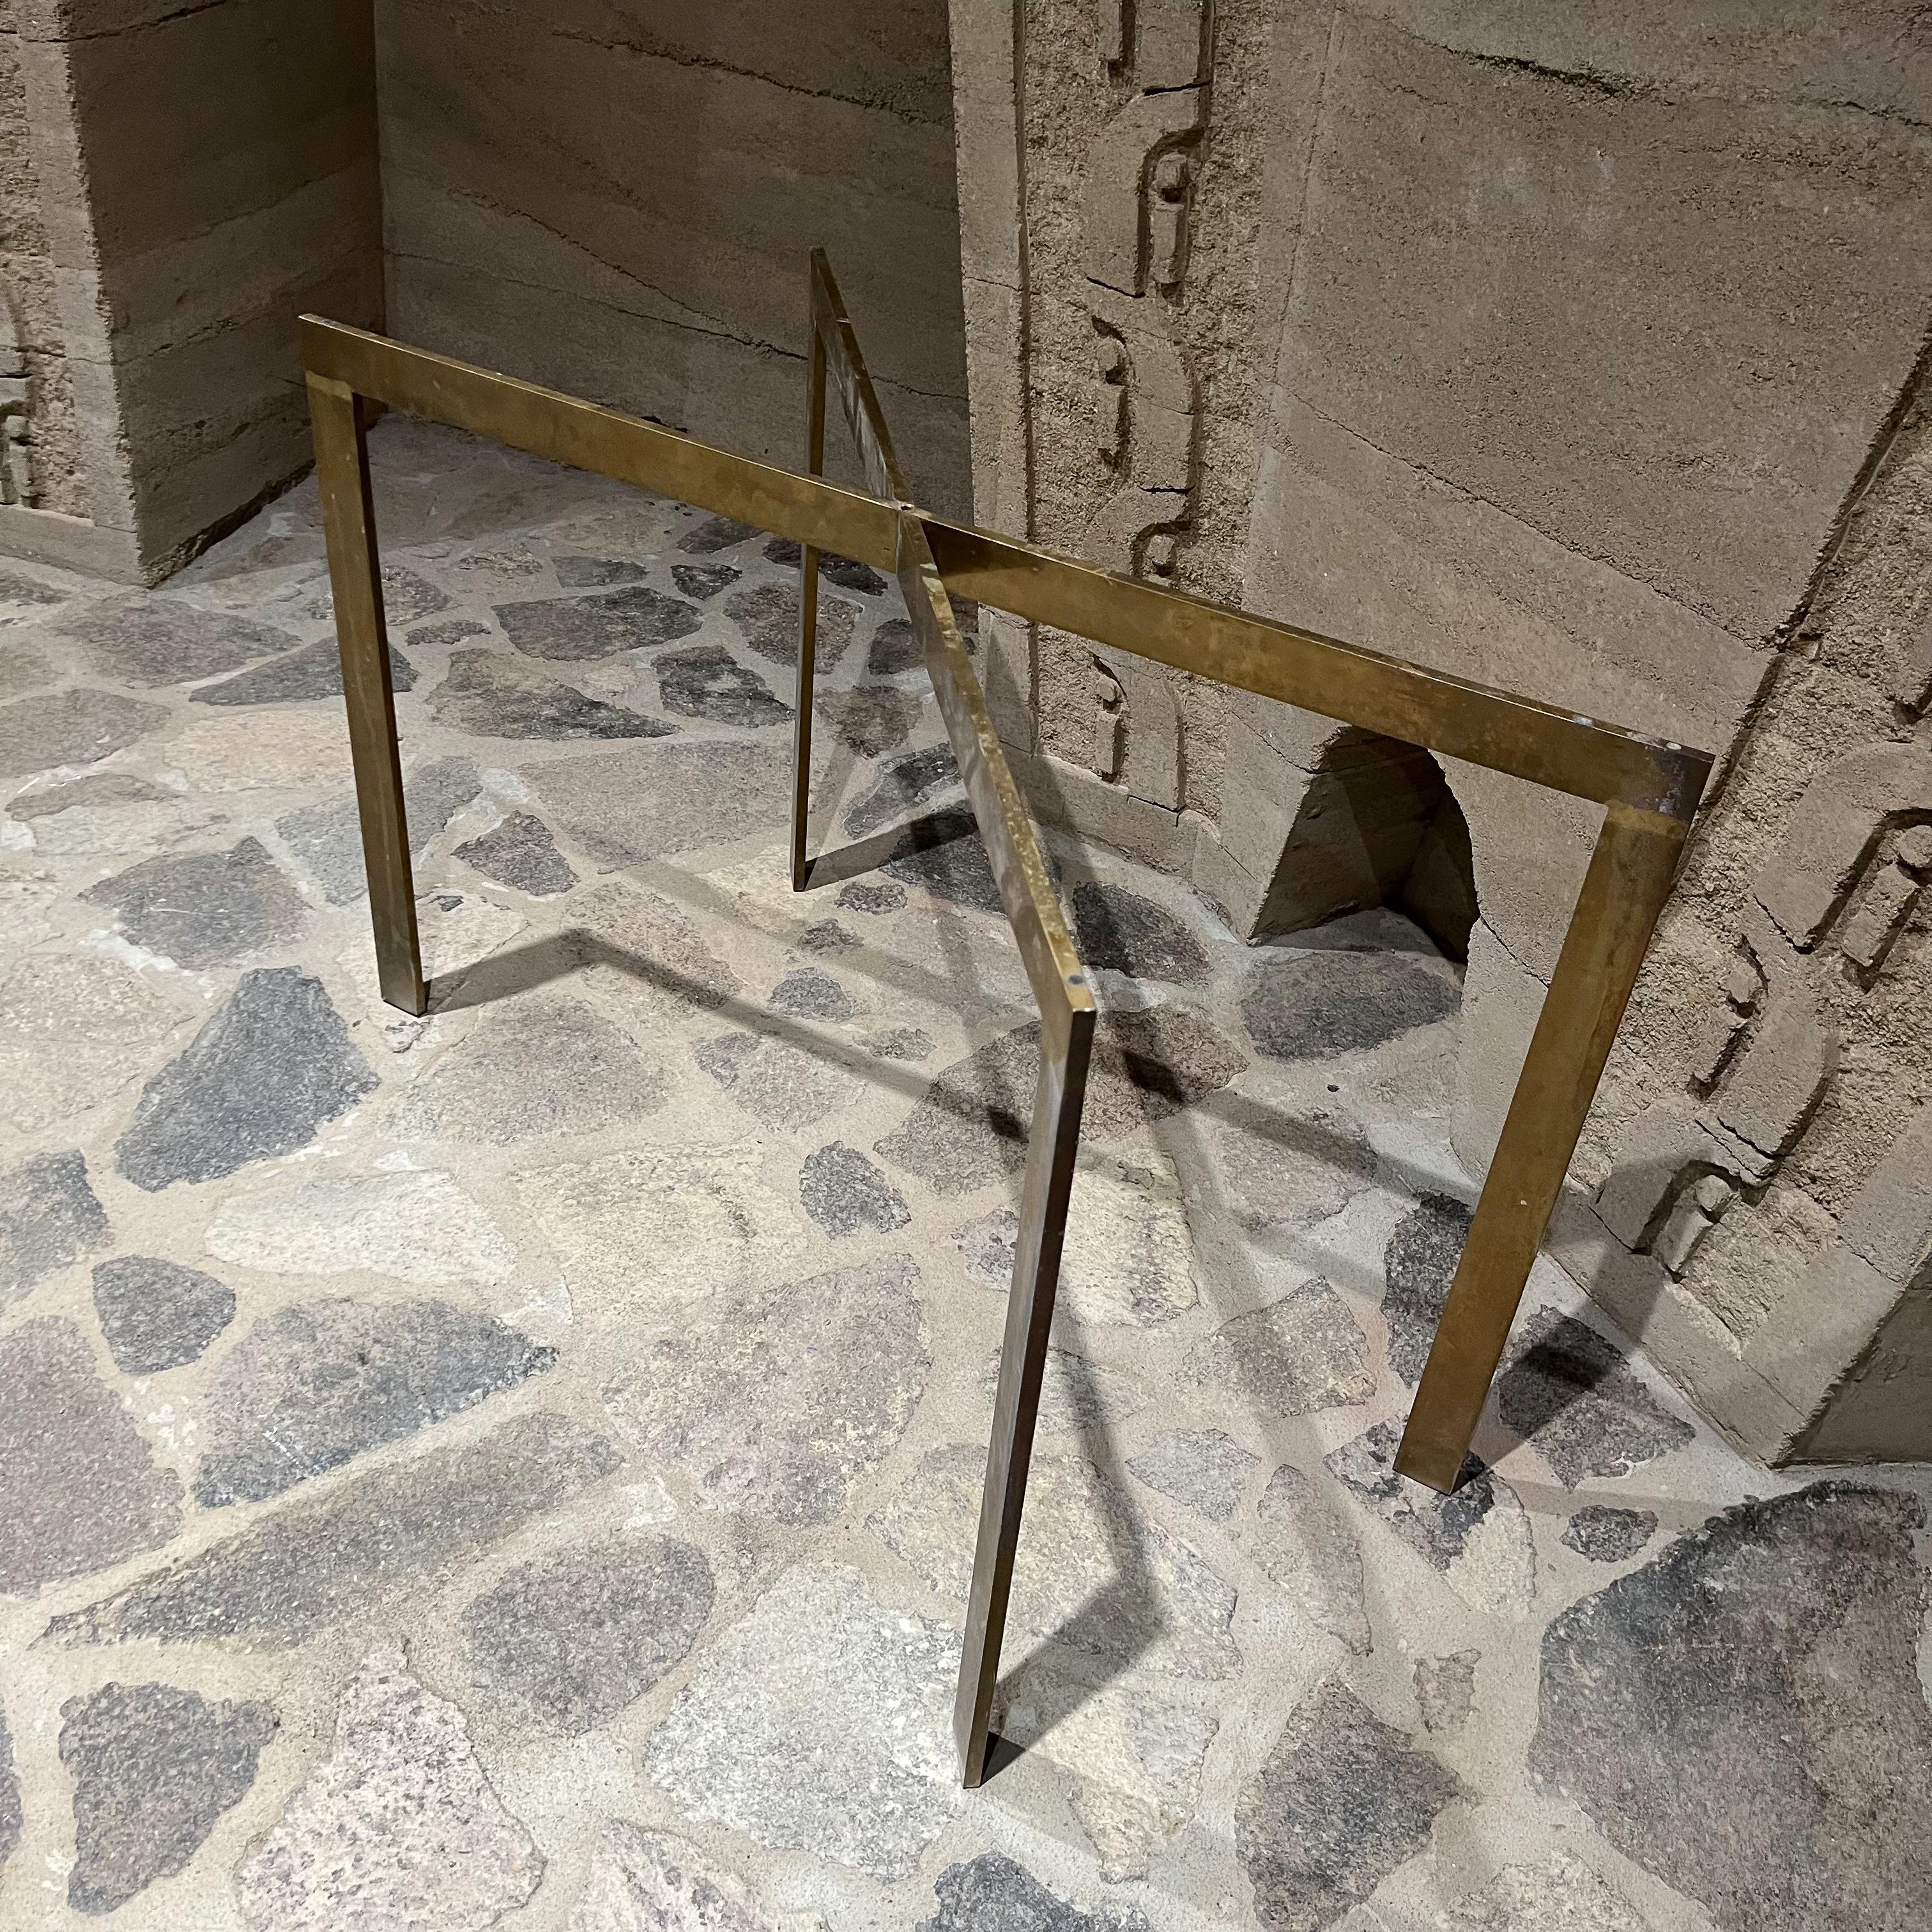 Console table base
1950s modern solid bronze heavy console table base attribution Arturo Pani, Mexico City
Unmarked
Listing is for base only. No glass included.
Glass option for an additional fee
Measures: 28 tall x 41.5 width x 20